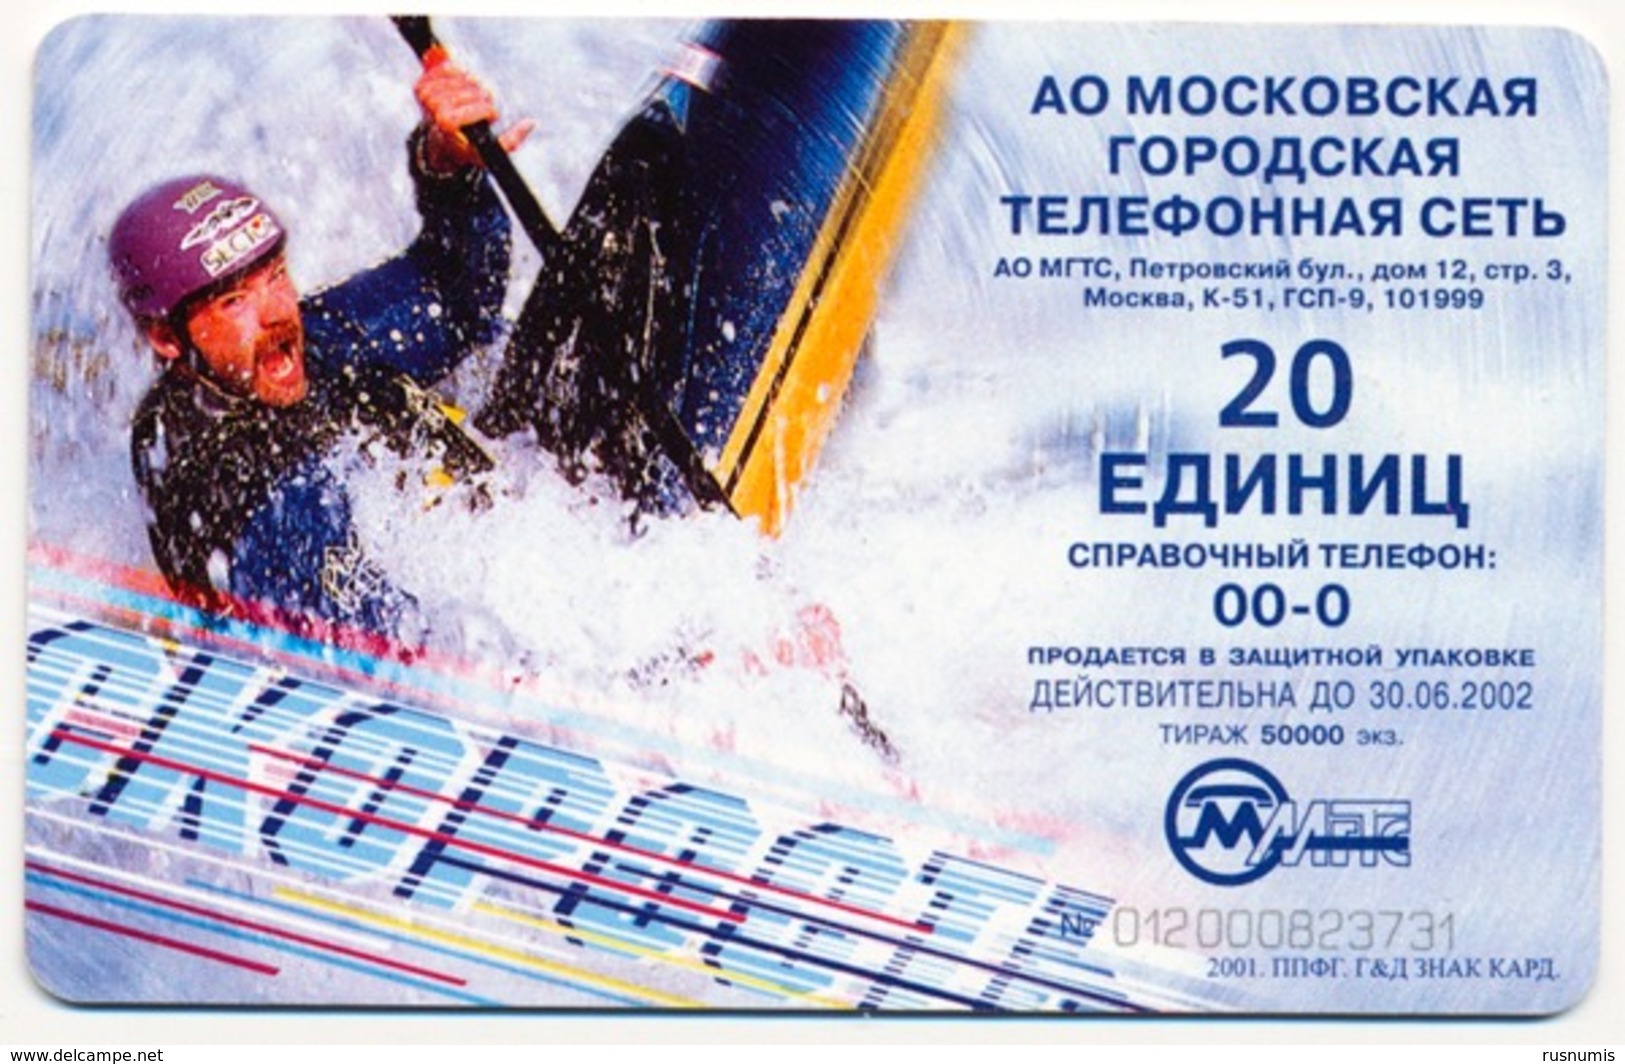 RUSSIA - RUSSIE - RUSSLAND MGTS 20 UNITS COMPLETE SET 4 PHONECARD TELECARTE SPEED SPORT RACE CAR BOAT BIKE QTY 50.000